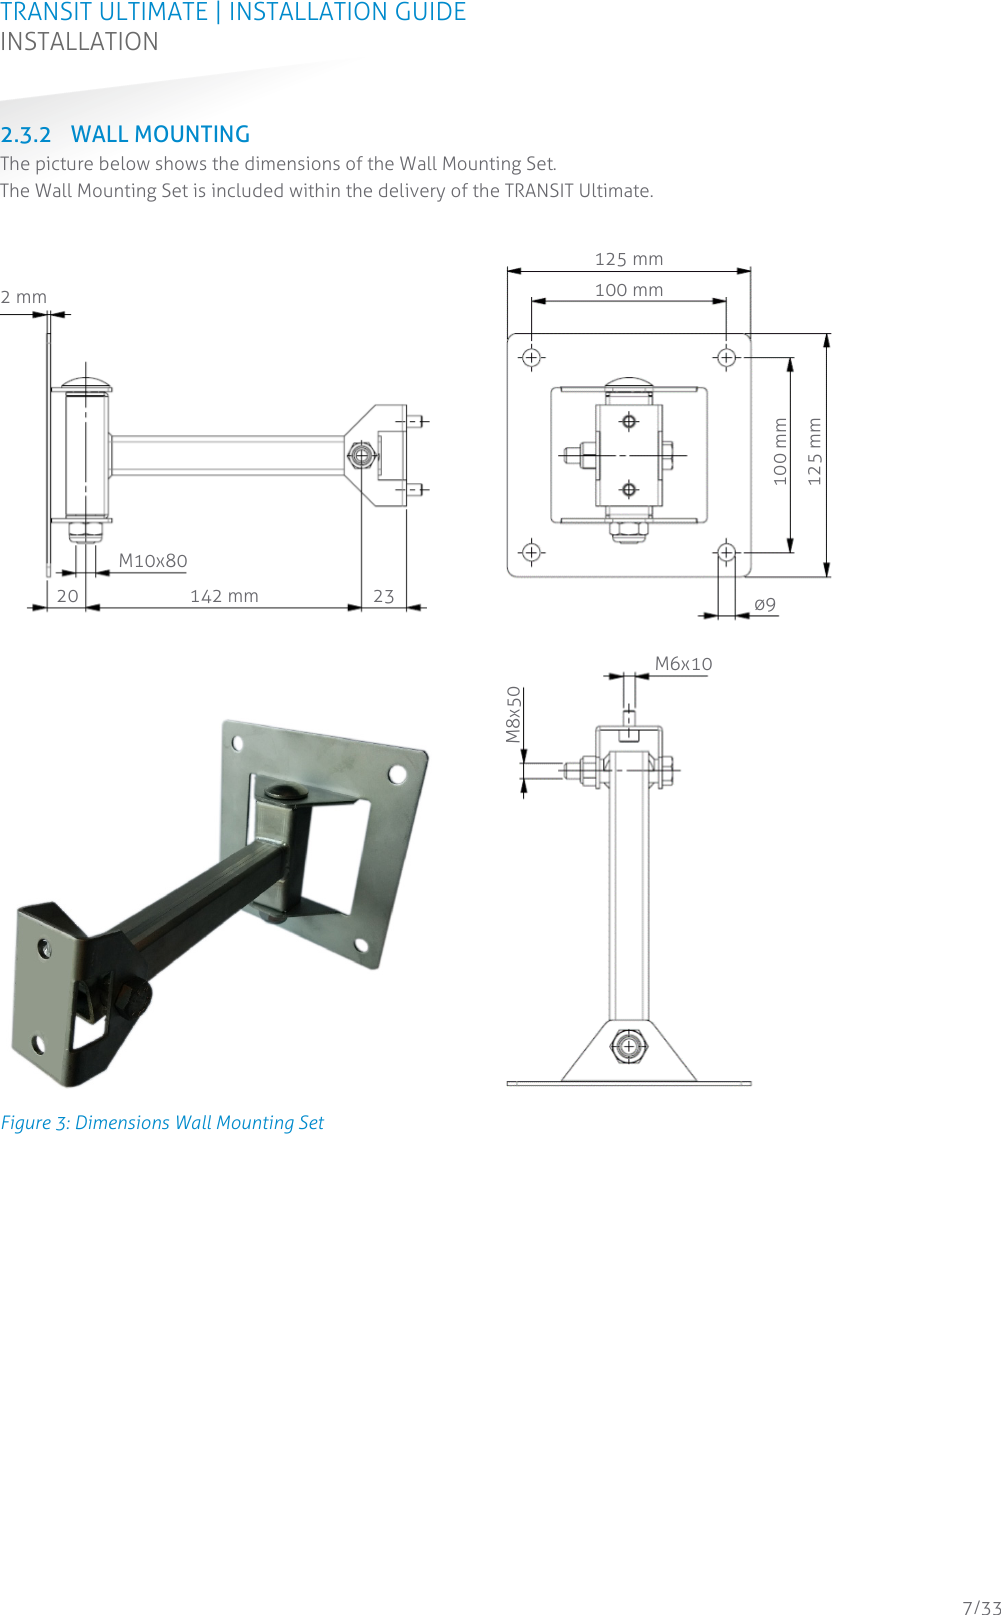 TRANSIT ULTIMATE | INSTALLATION GUIDE INSTALLATION  7/33 2.3.2 WALL MOUNTING The picture below shows the dimensions of the Wall Mounting Set. The Wall Mounting Set is included within the delivery of the TRANSIT Ultimate.  Figure 3: Dimensions Wall Mounting Set    2 mm 142 mm 23 20 M10x80 125 mm 100 mm 125 mm 100 mm 9 M8x50 M6x10 